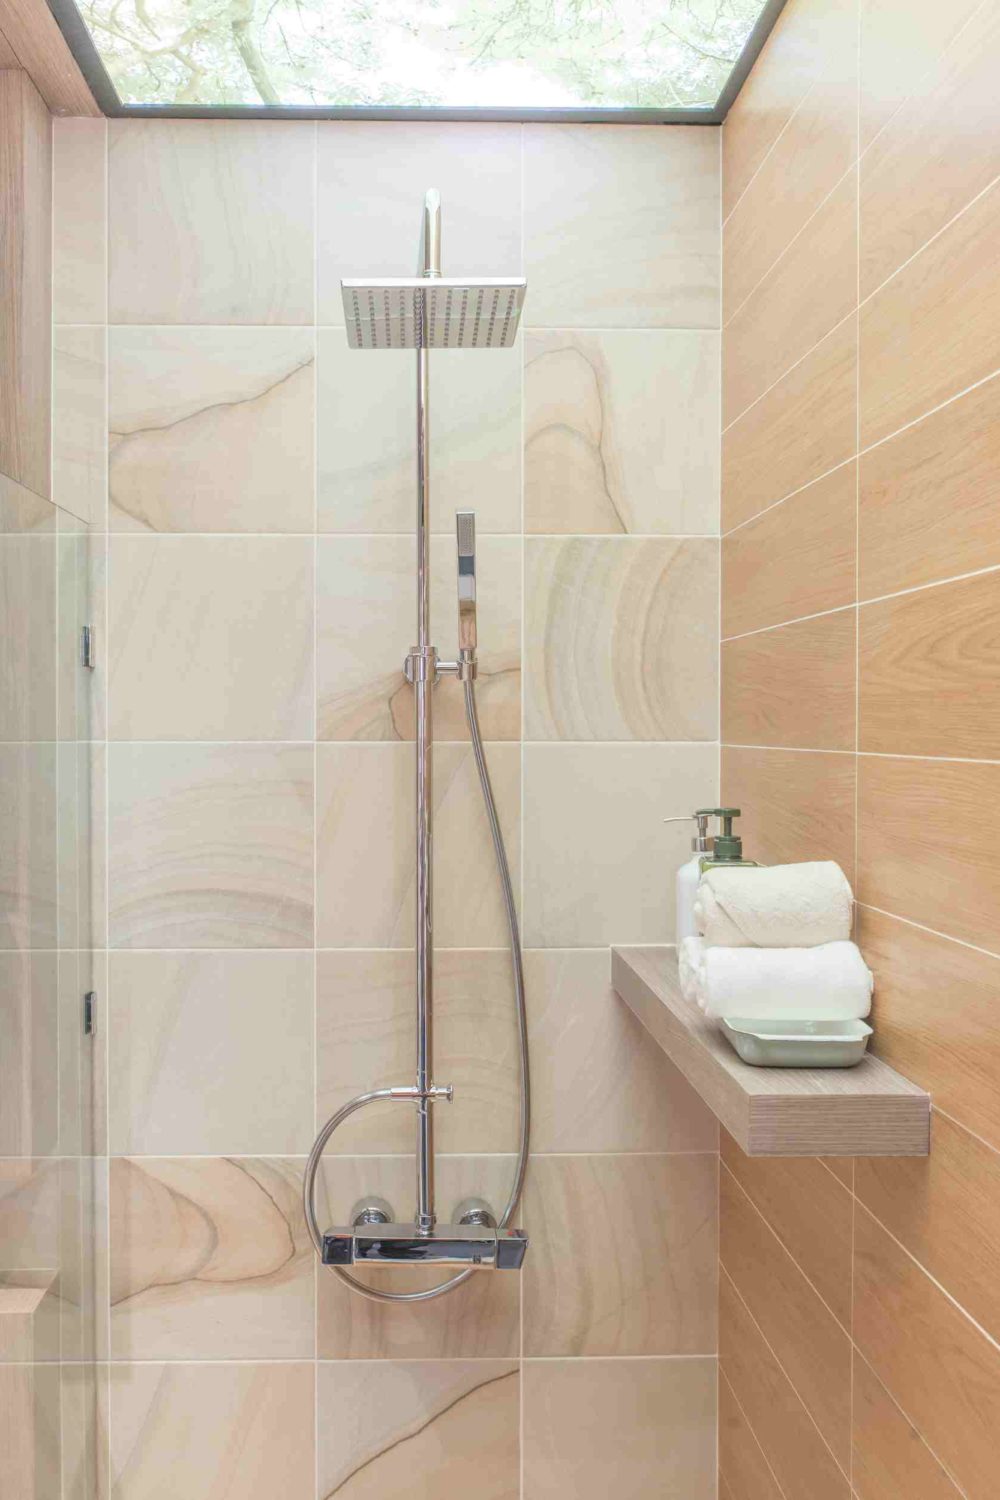 Common Shower Problems & Professional Solutions: When to Seek Help 